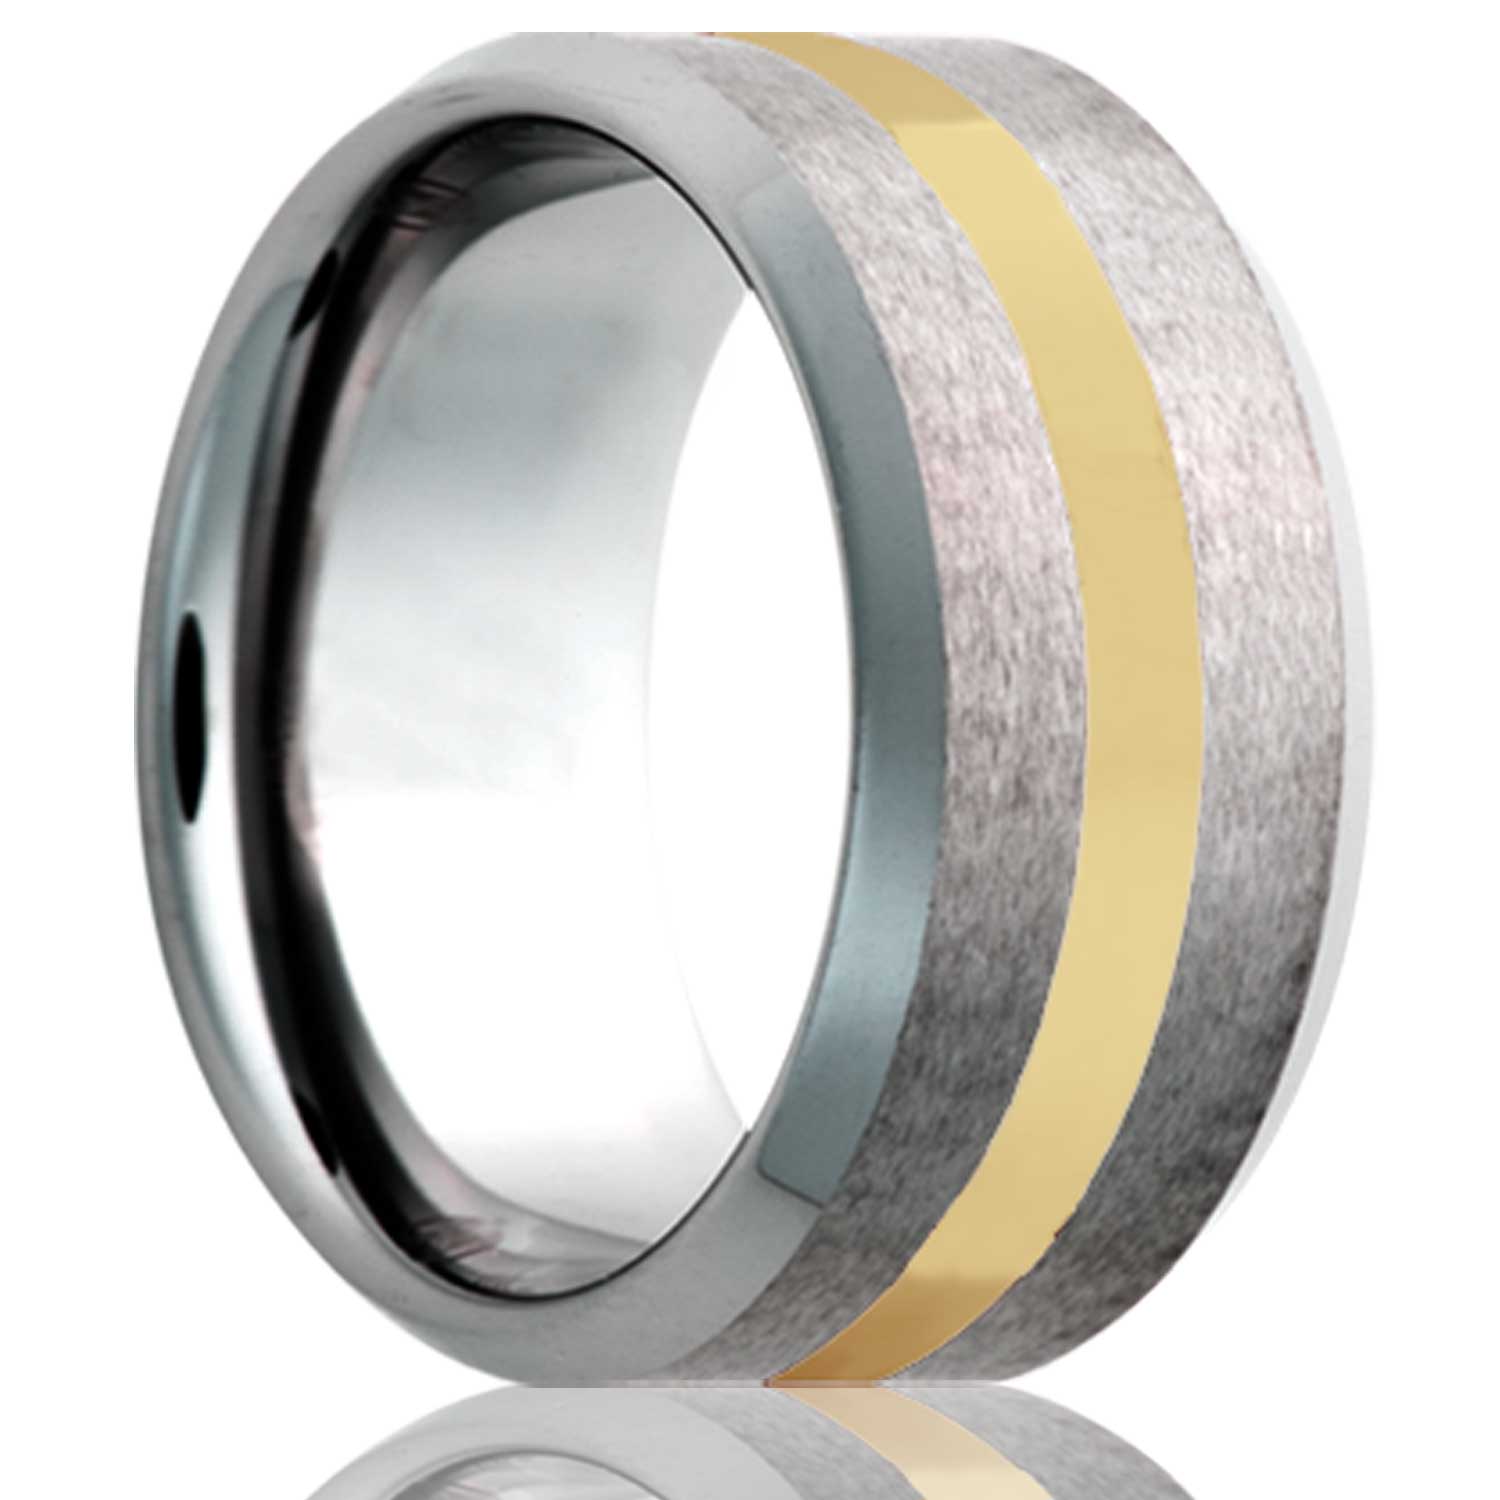 A 14k yellow gold inlay satin finish tungsten wedding band with beveled edges displayed on a neutral white background.